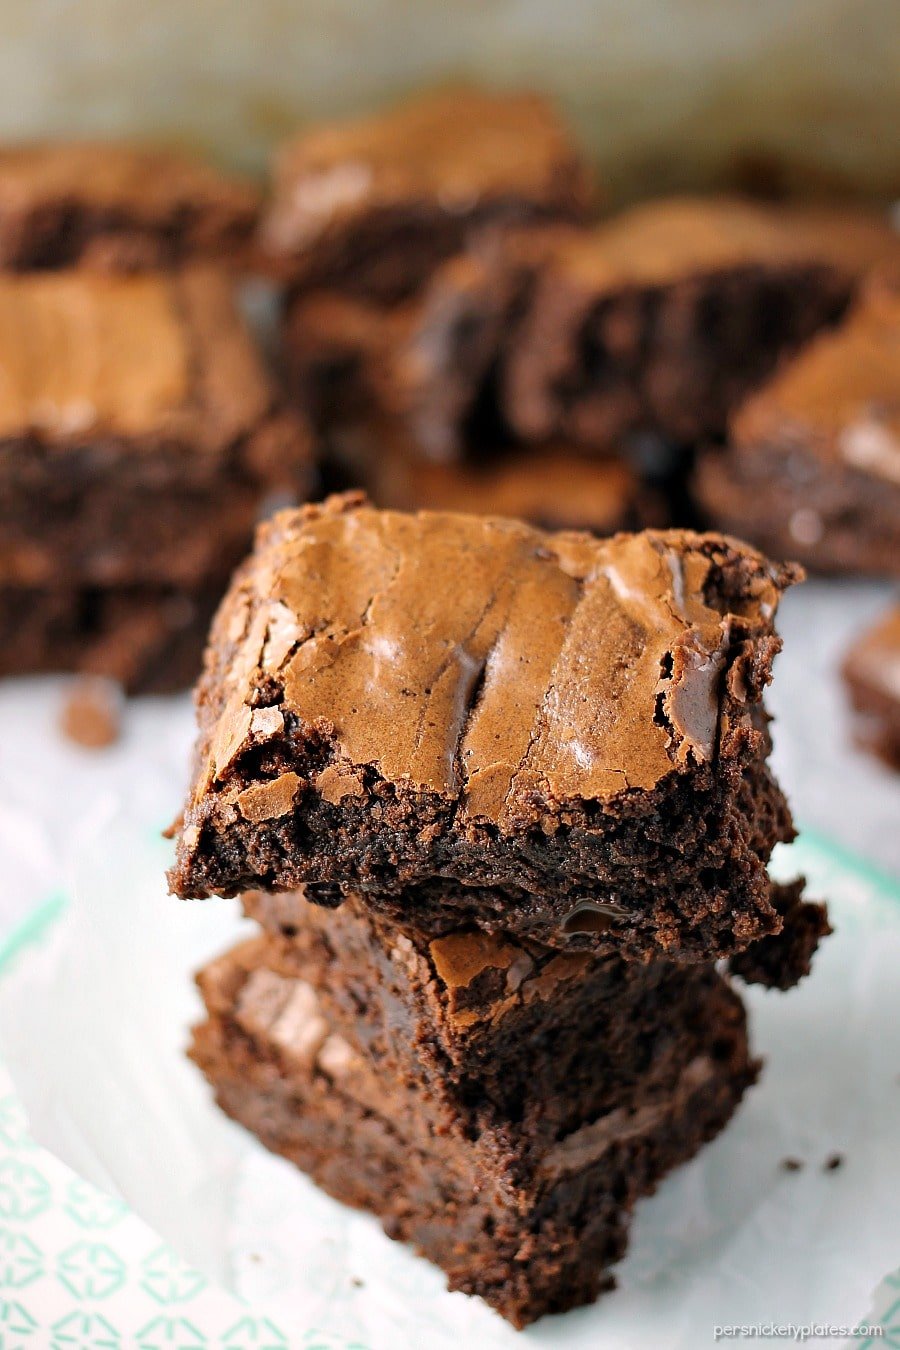 Chocolate Brownies are the iconic dessert you crave! Learn how to make "Better Than Box" Chocolate Brownies with our amazingly simple brownie recipe!